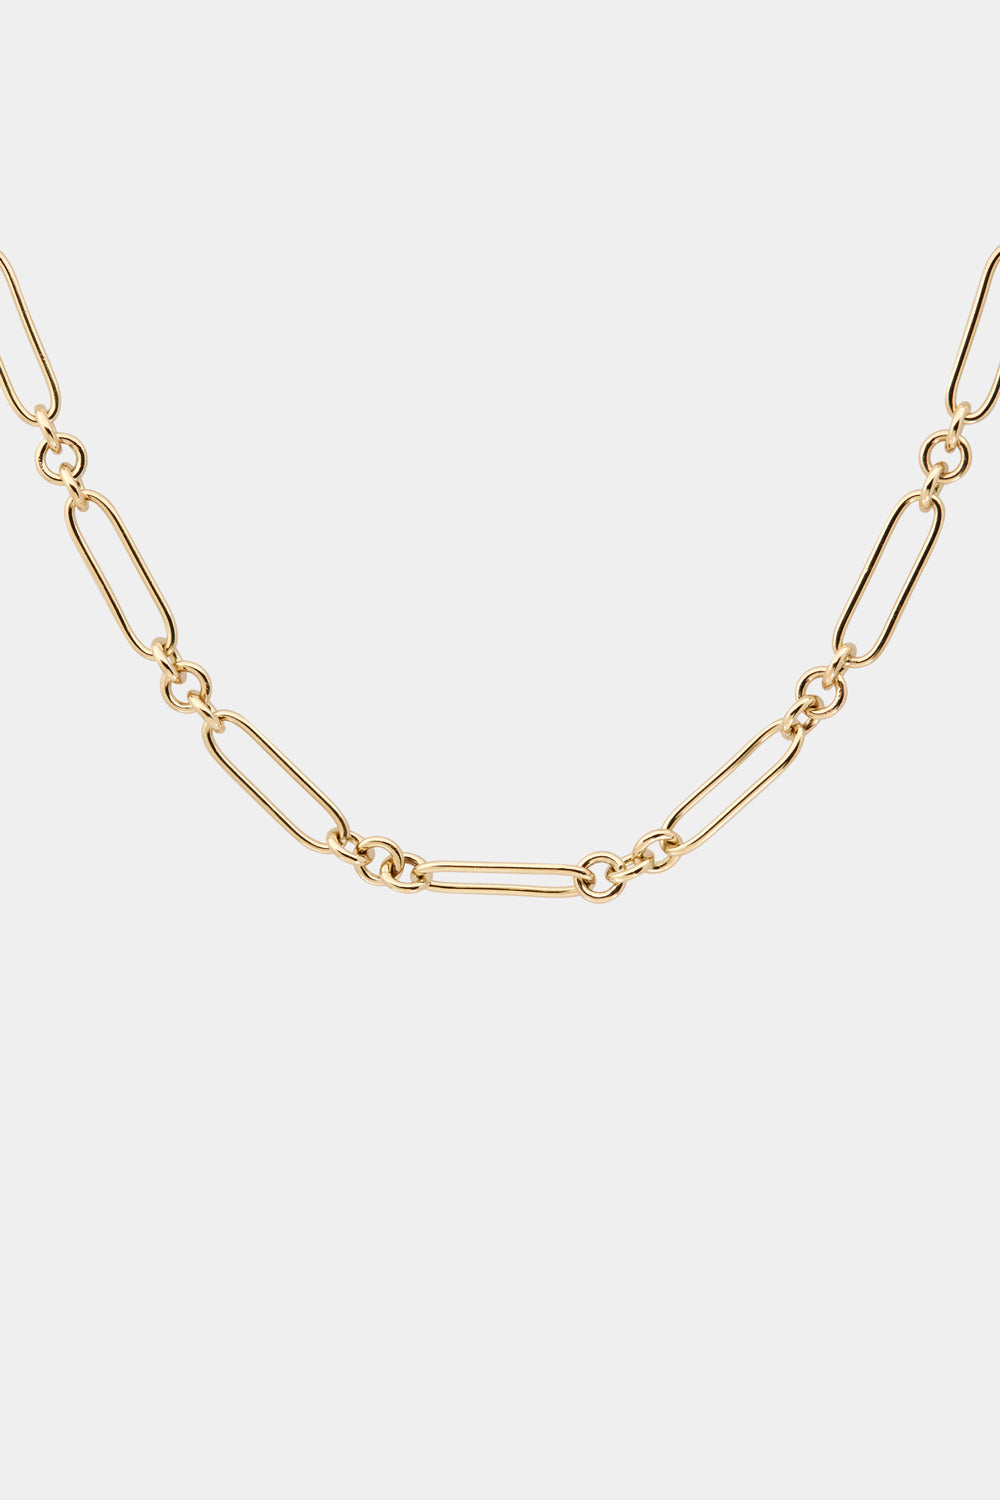 Lennox Necklace | Gold, More Options Available